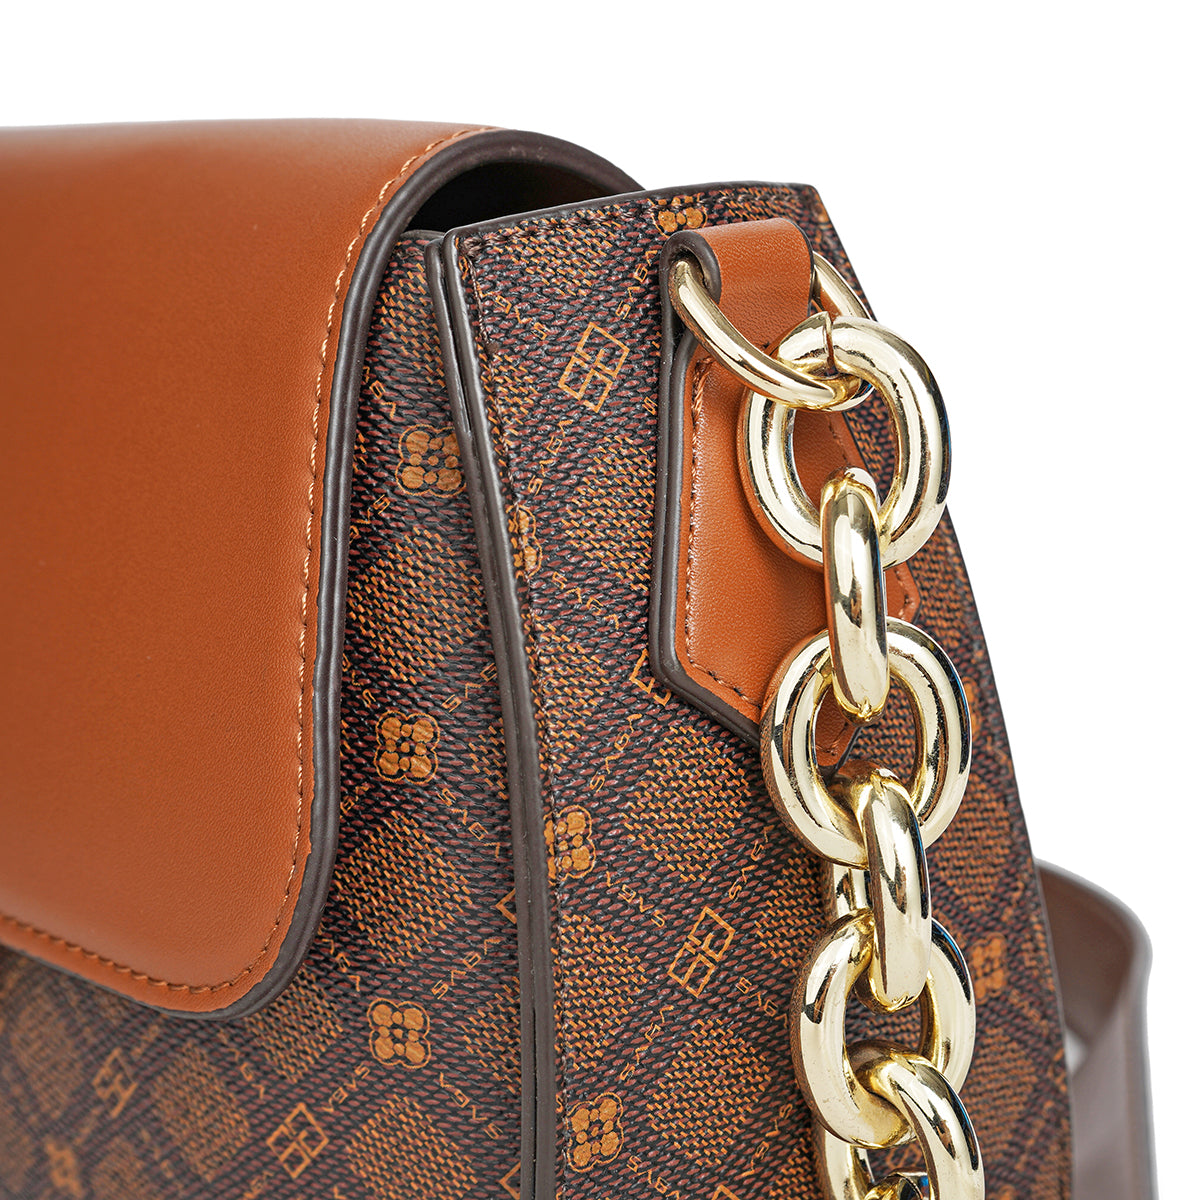 A light and practical bag with a golden chain holder, available in two colors